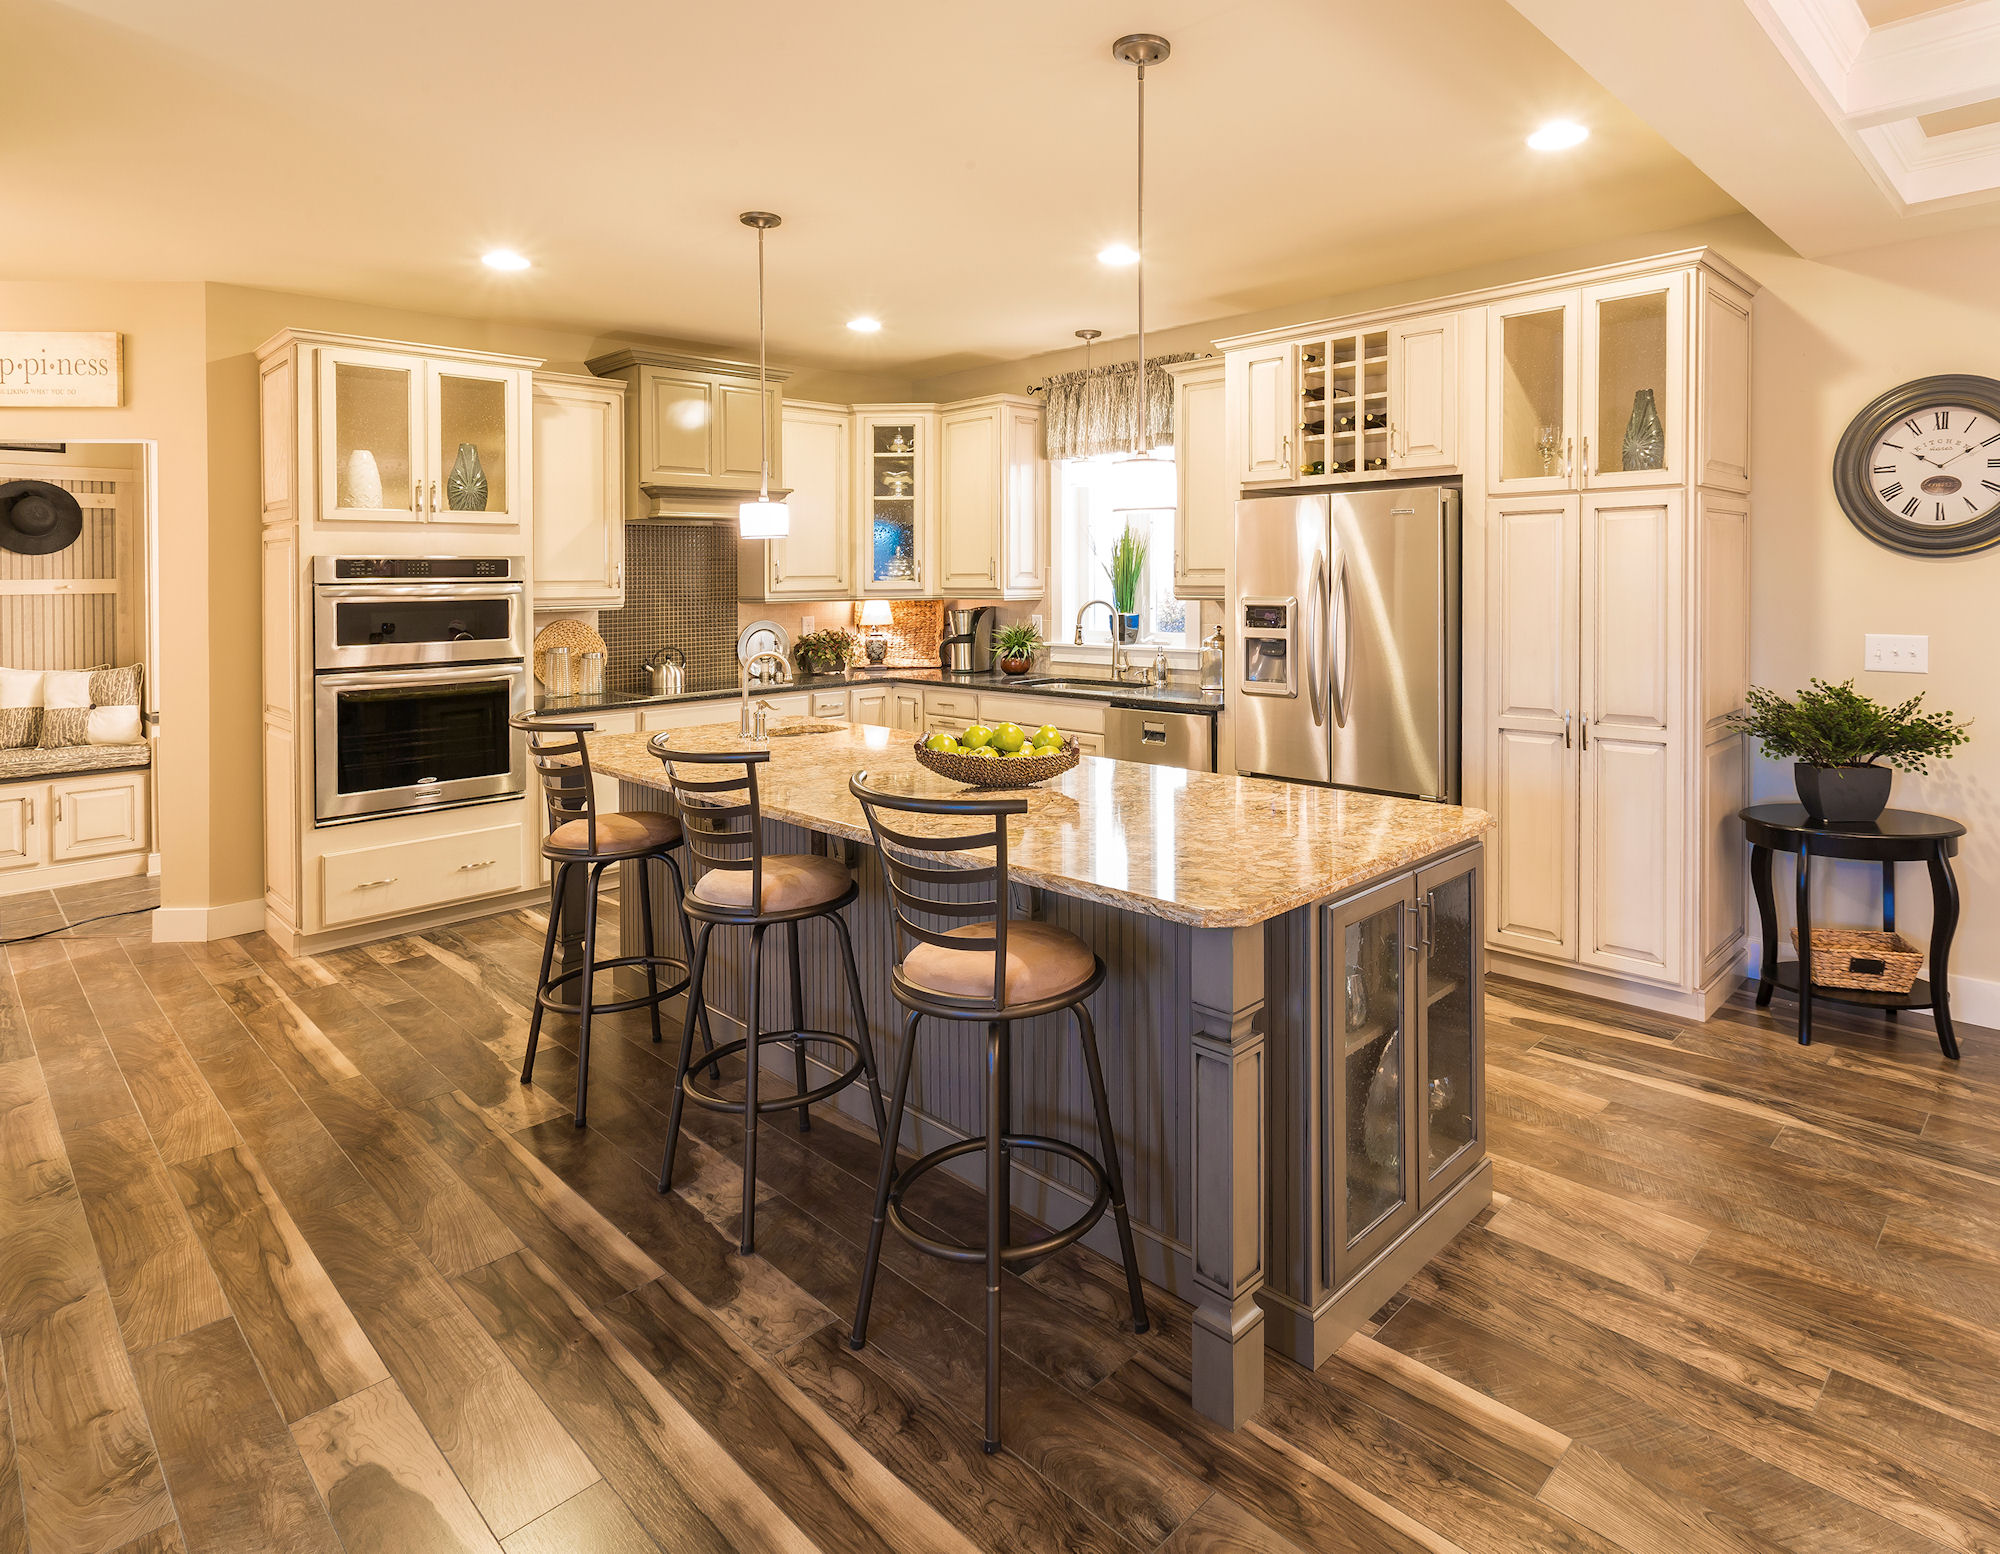 Ritz-Craft Custom Homes Wins Two STARS Awards from the NCHBA